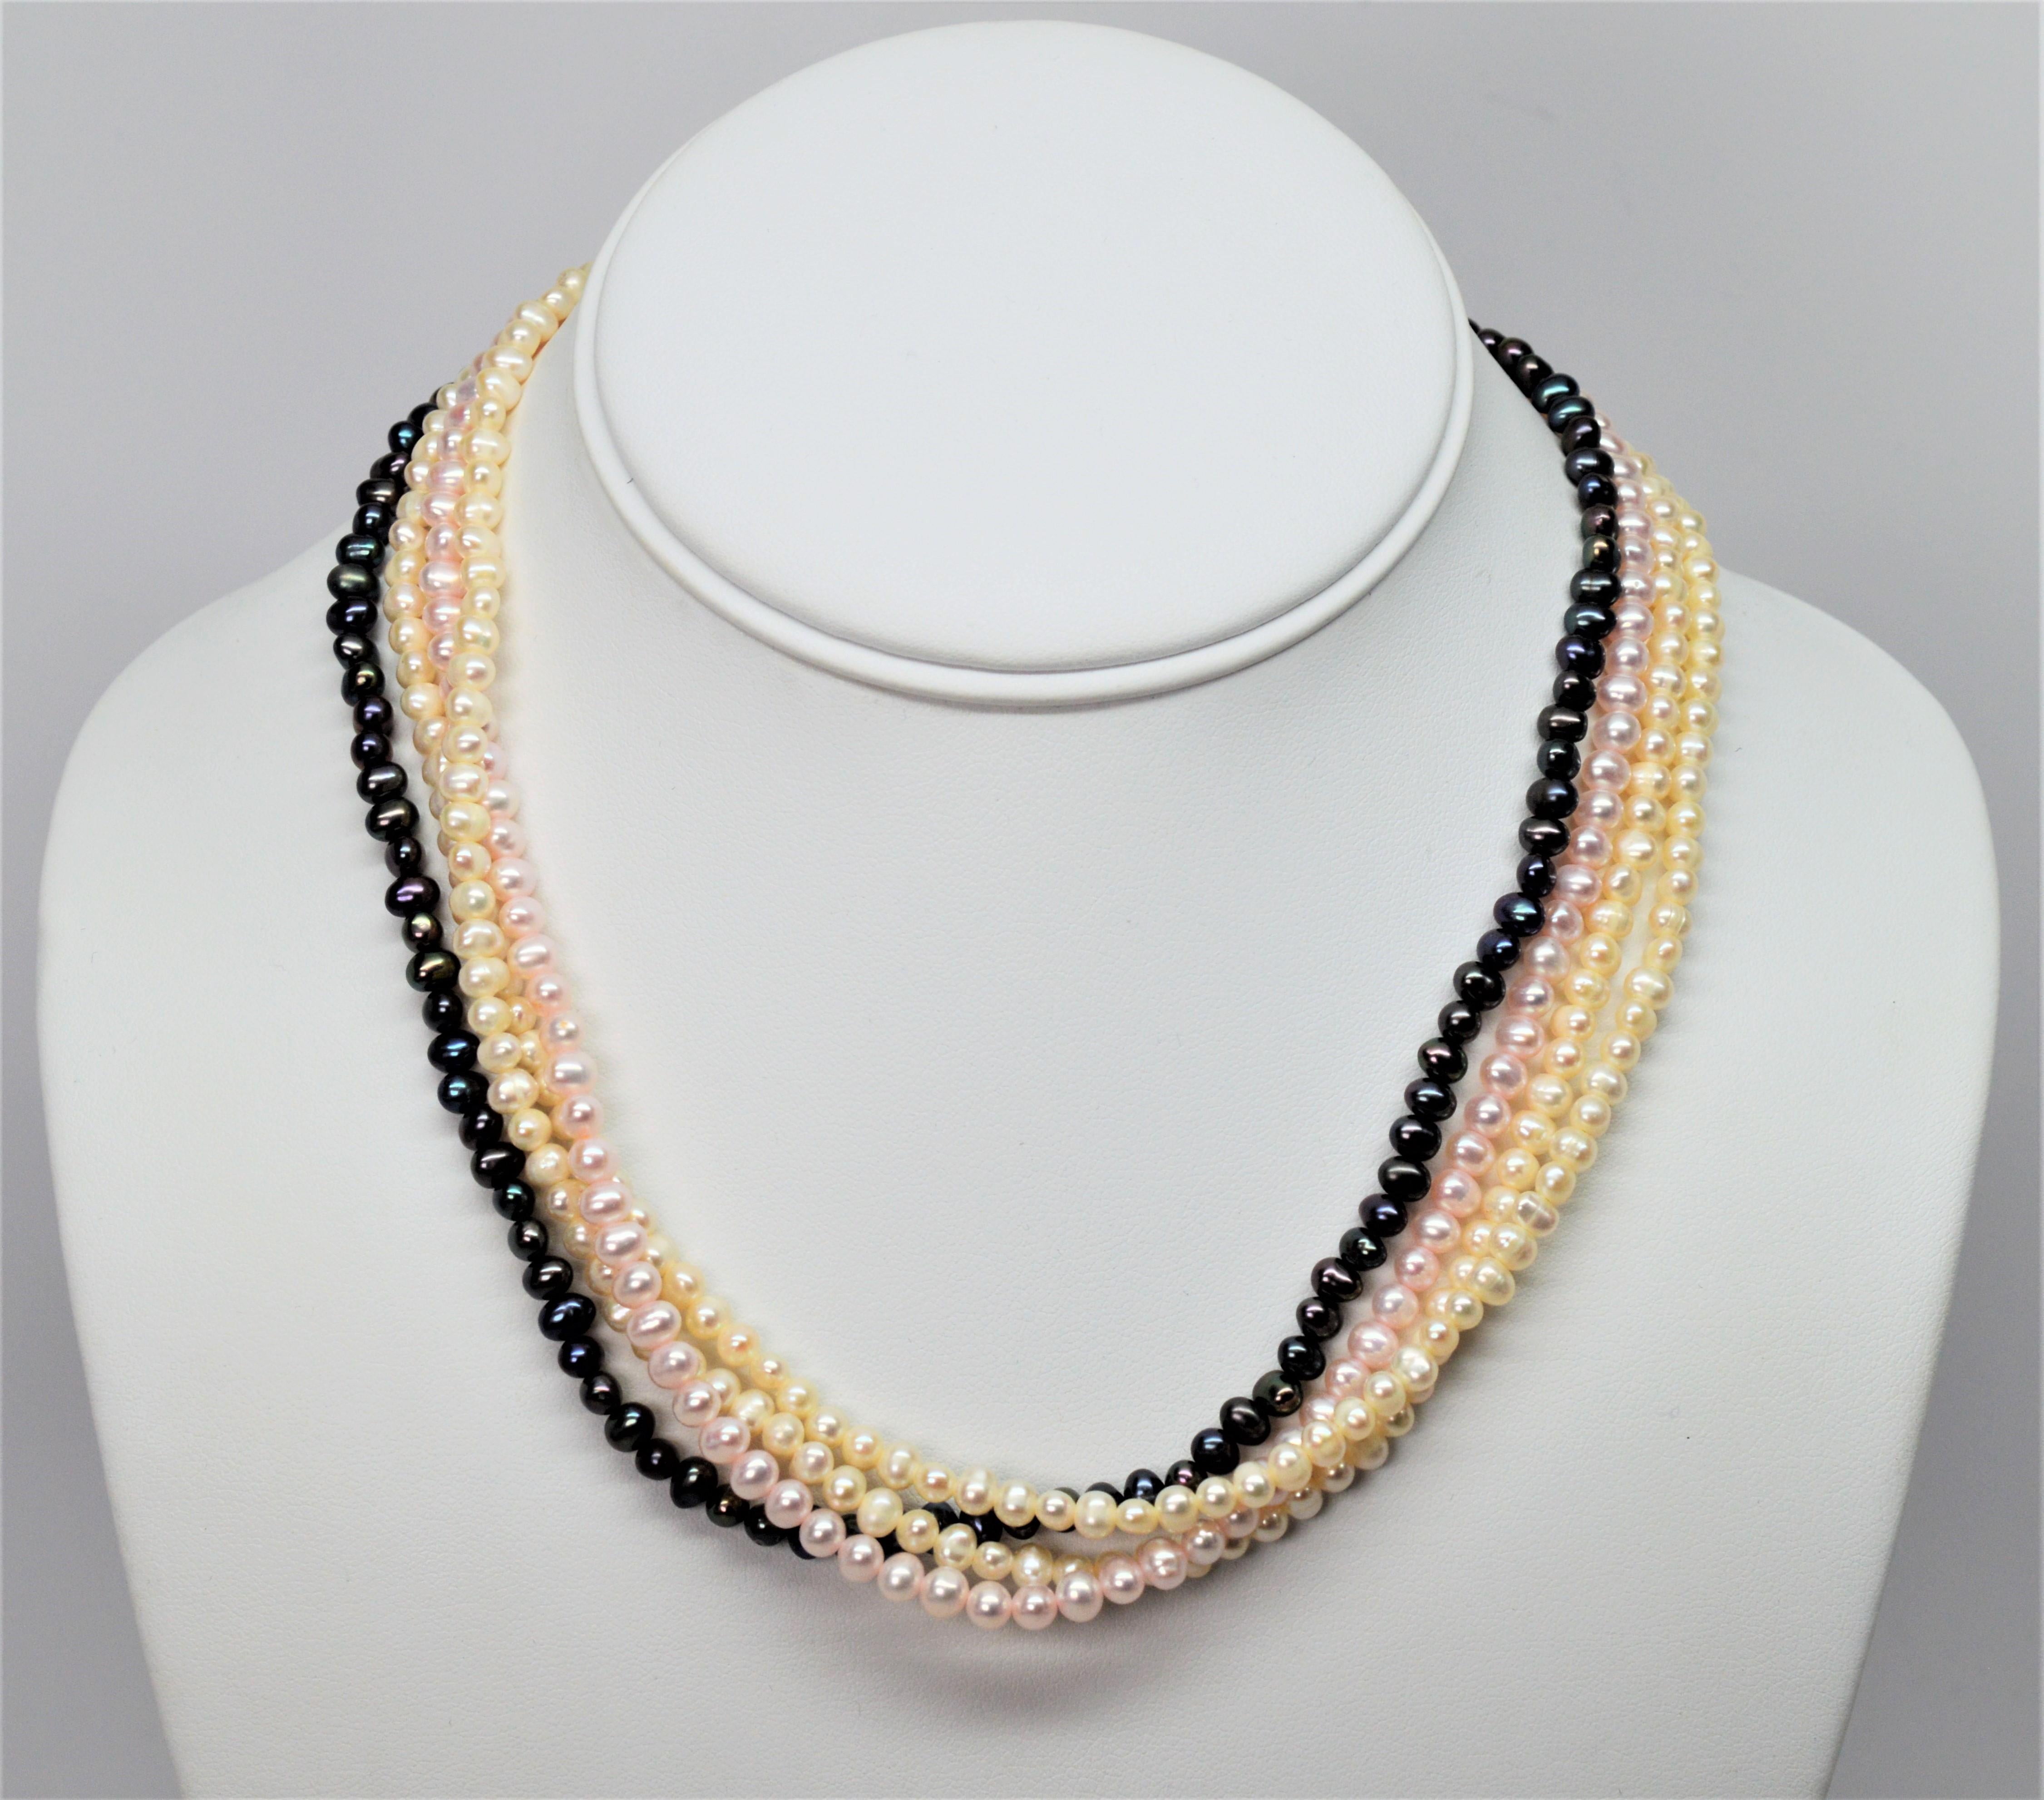 Classic creamy white, soft blush pink and hues of gray iridescent Akoya pearl strands create a lovely pearl necklace which can be worn as a drape or colorful twist.  Sixteen inches 16